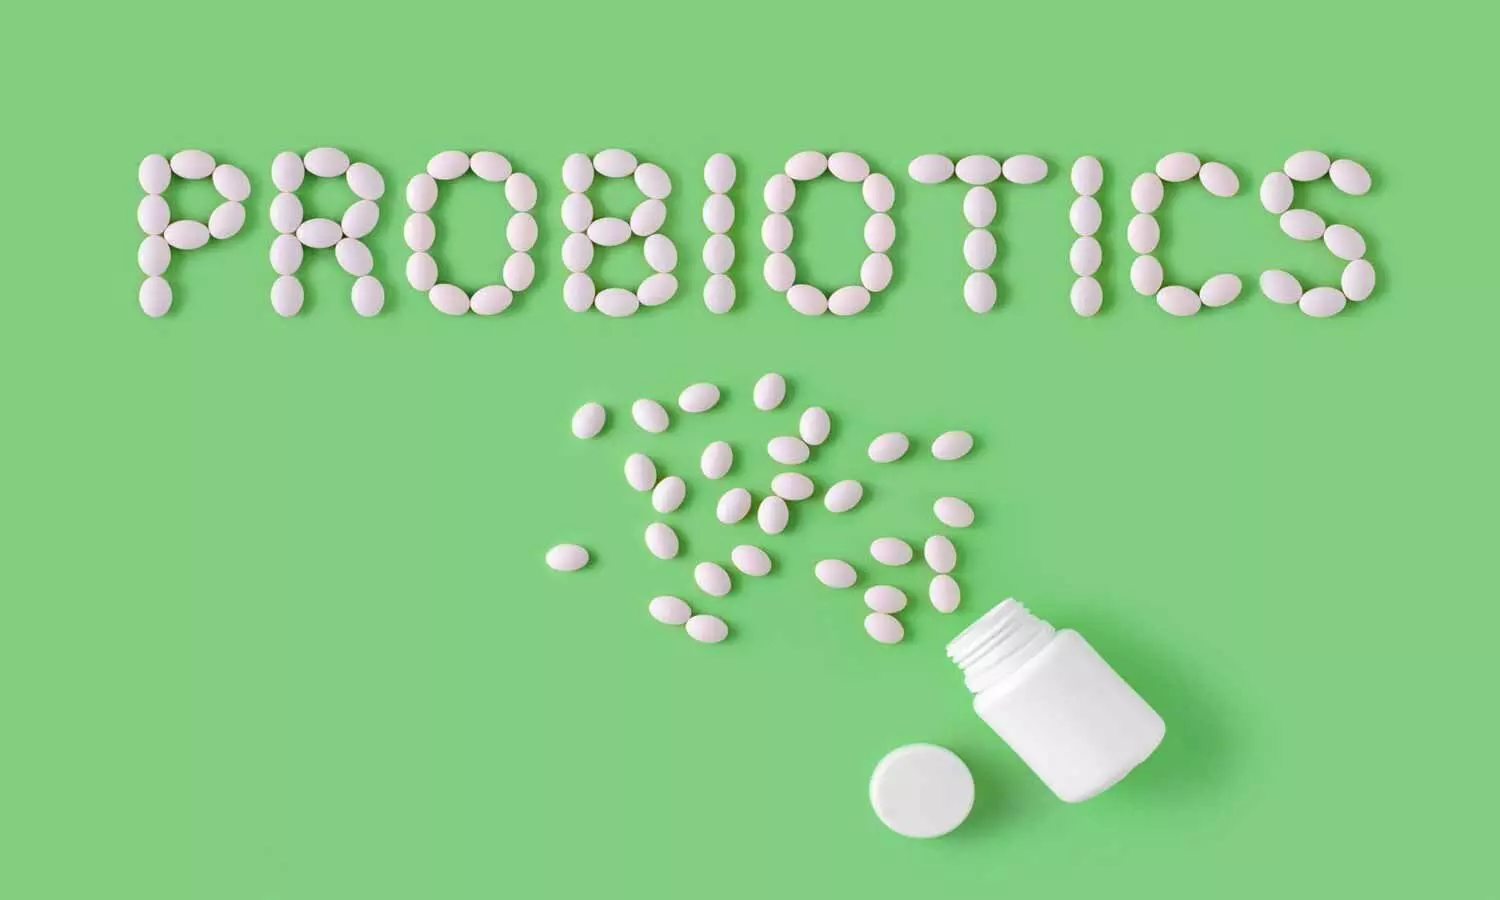 Probiotics alone or combined with prebiotics may help ease depression